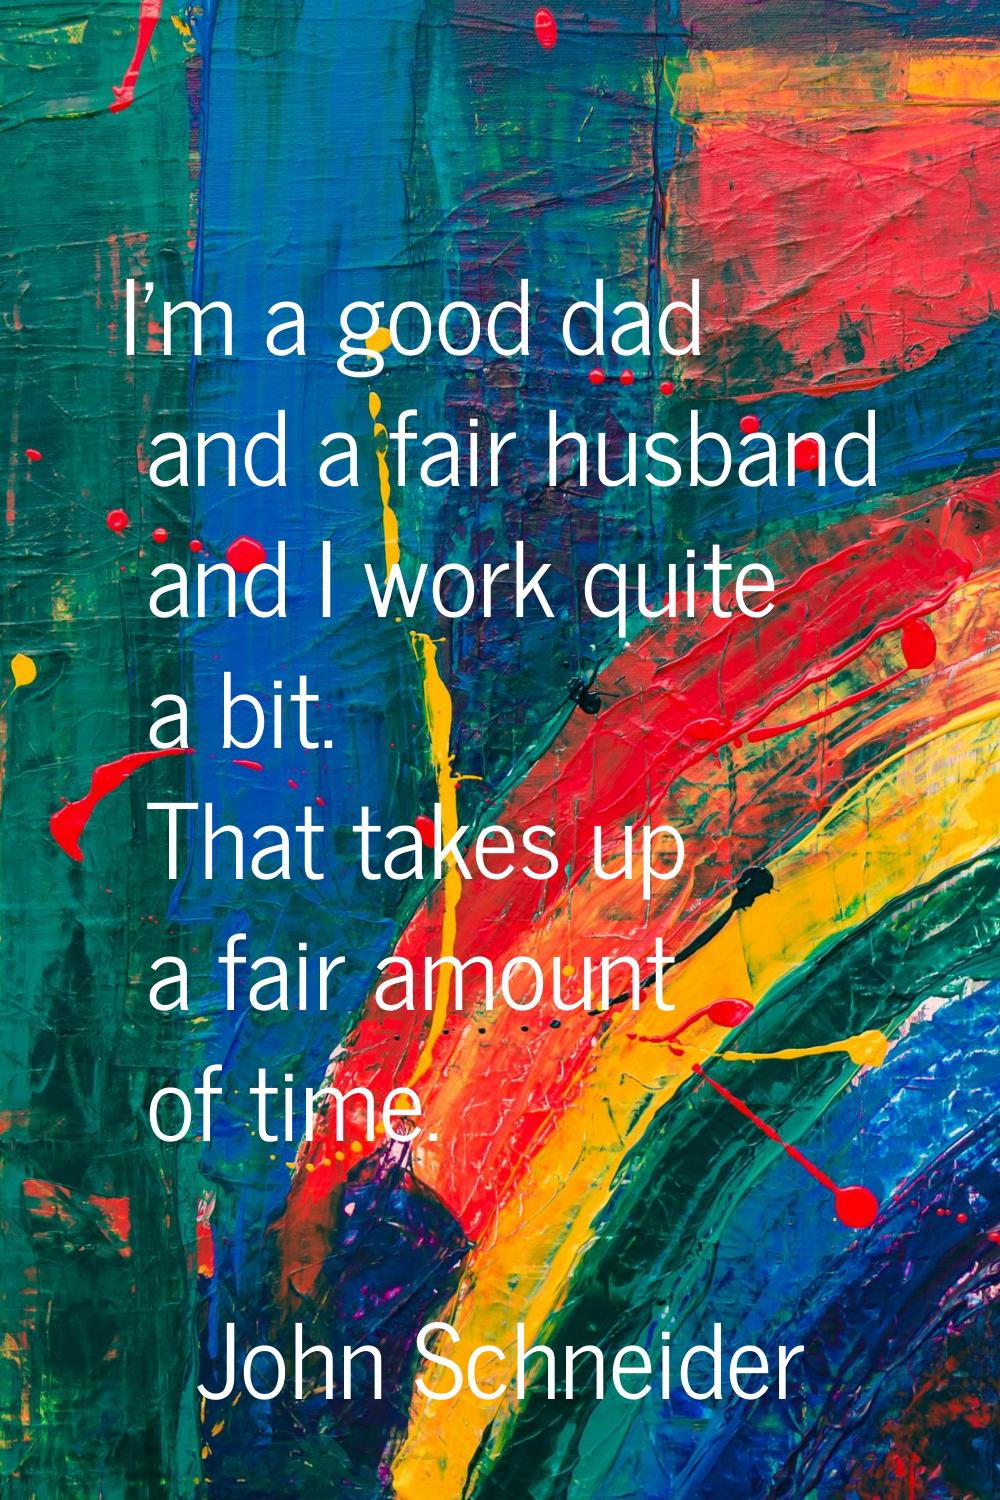 I'm a good dad and a fair husband and I work quite a bit. That takes up a fair amount of time.